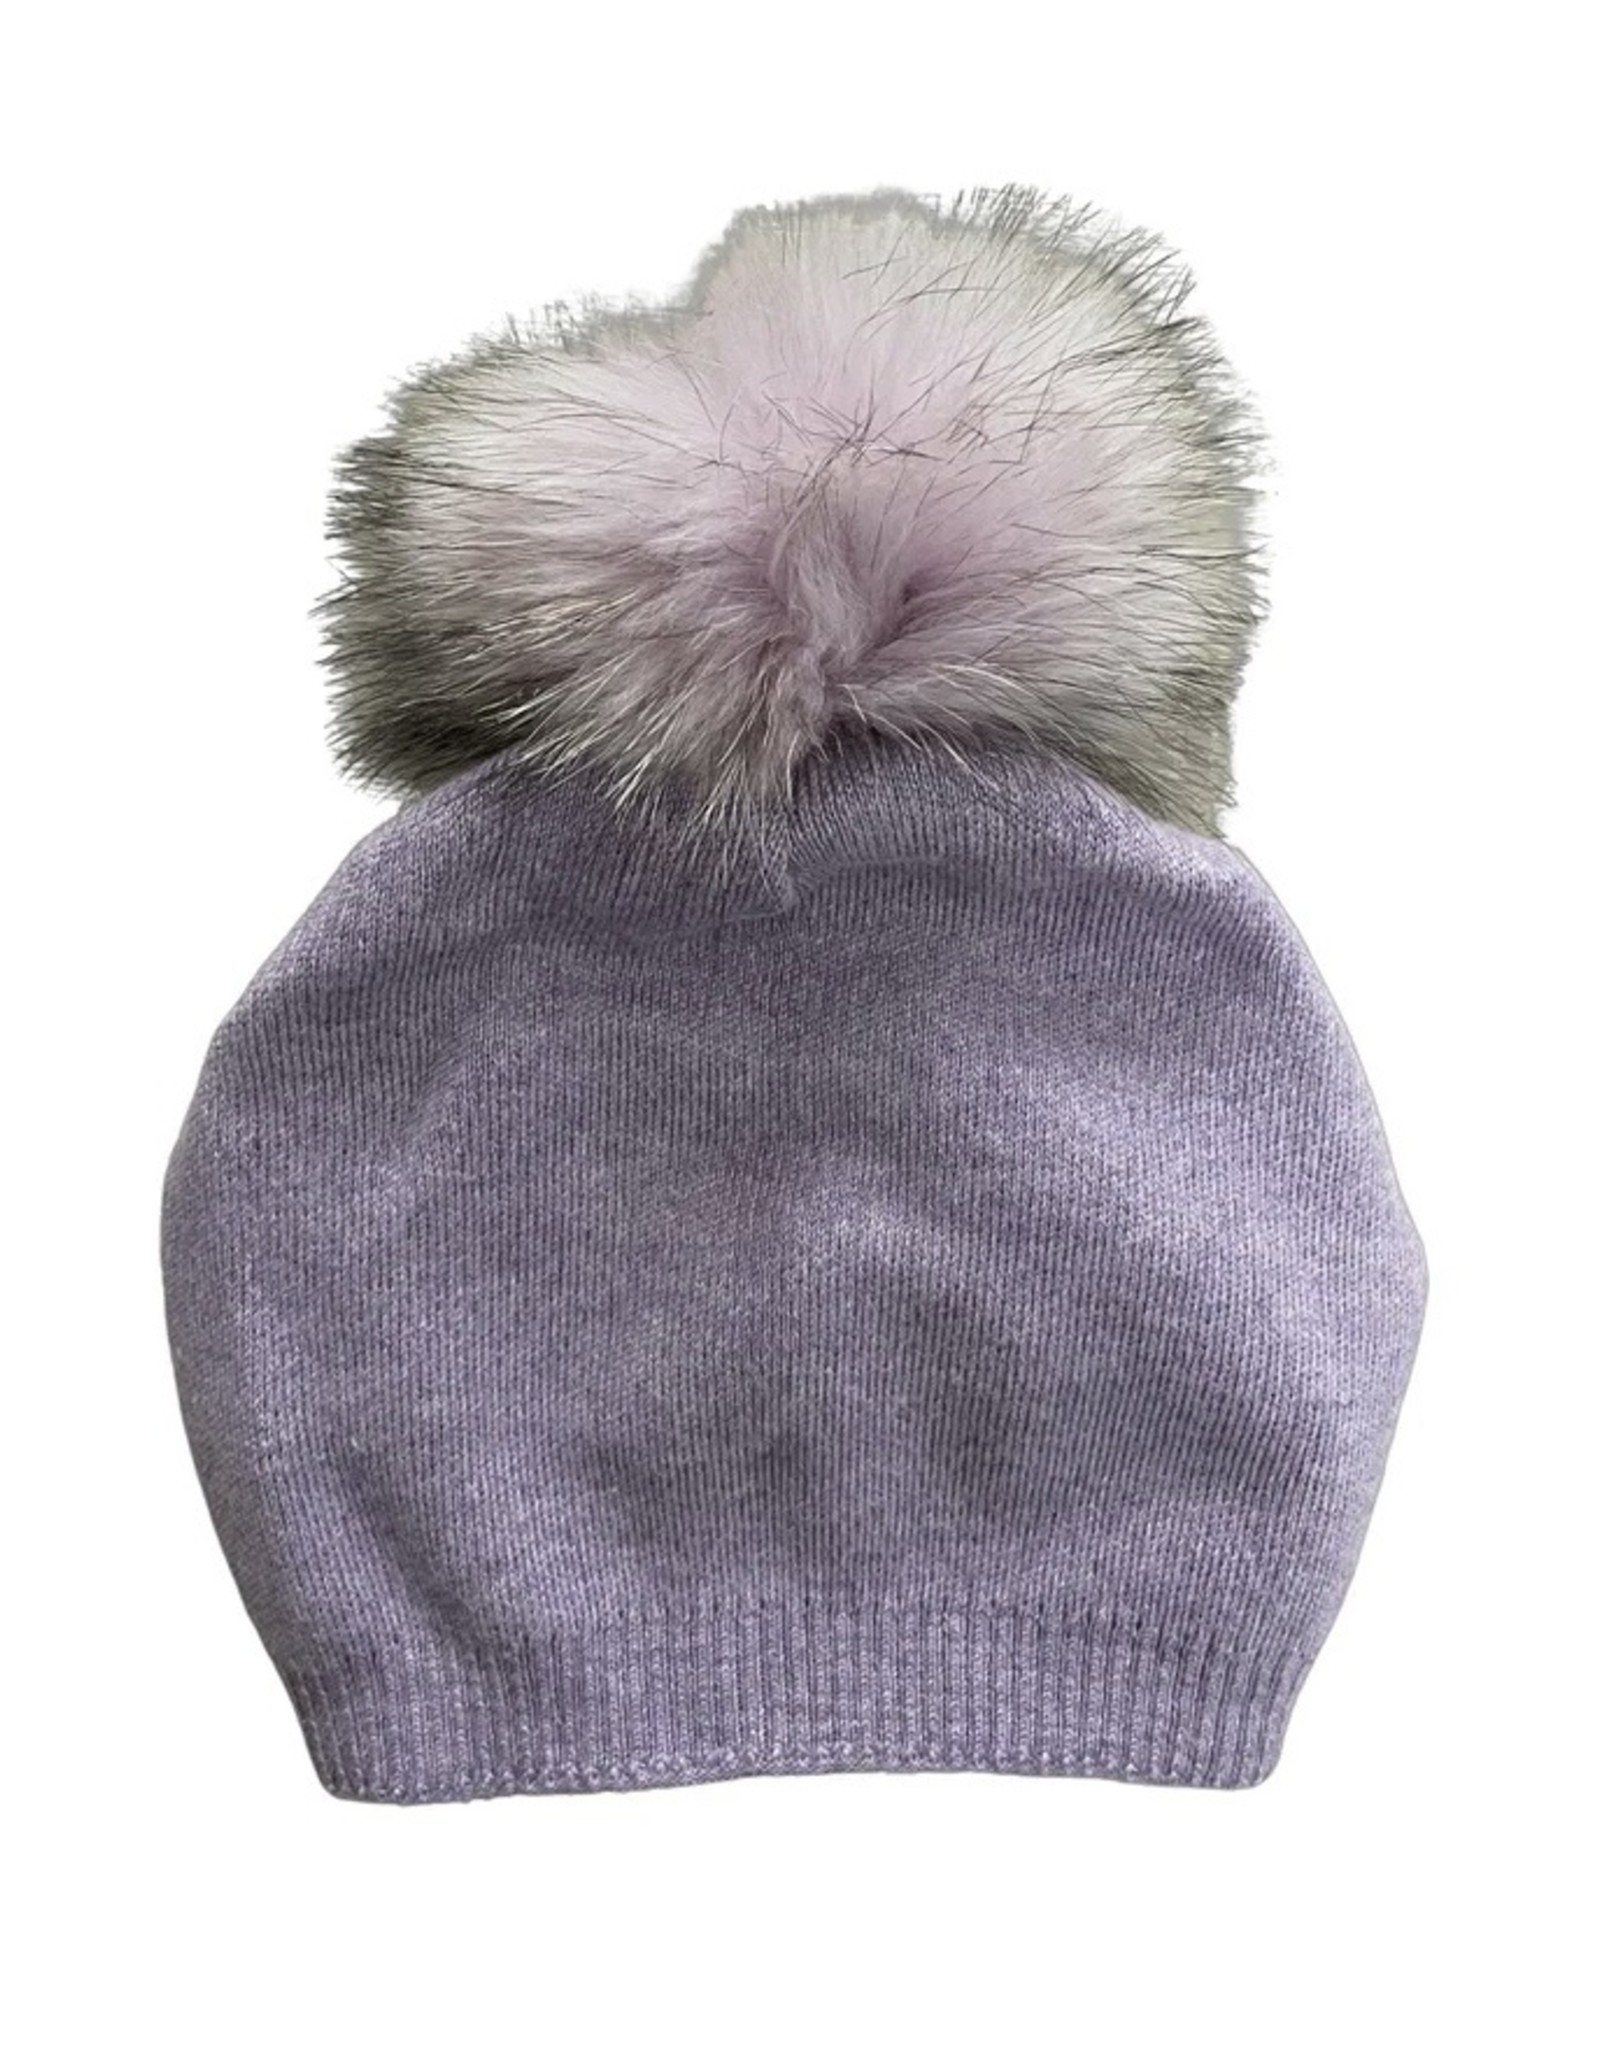 Evelyn Beanie with Faux Fur Removable Pom Pom